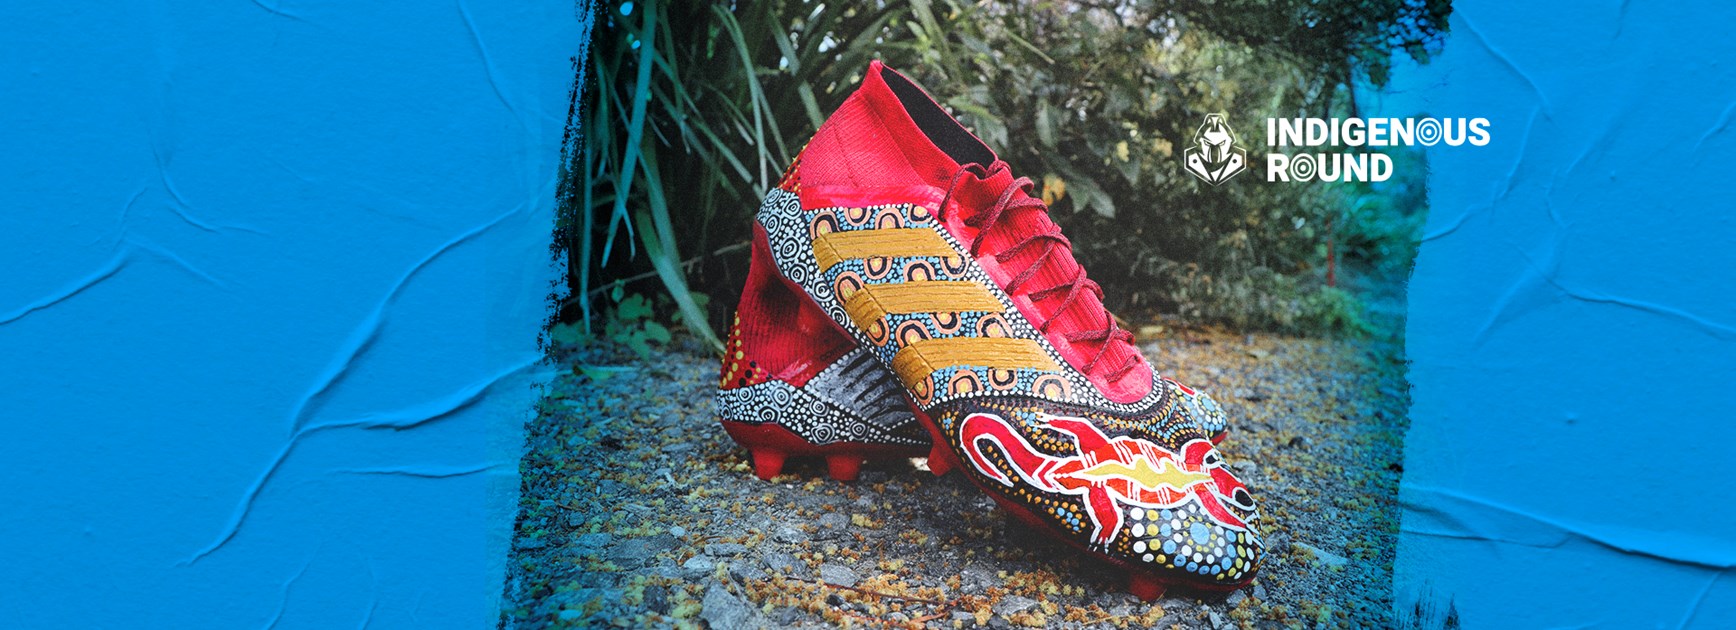 Corey's boots create brighter future for Indigenous youth